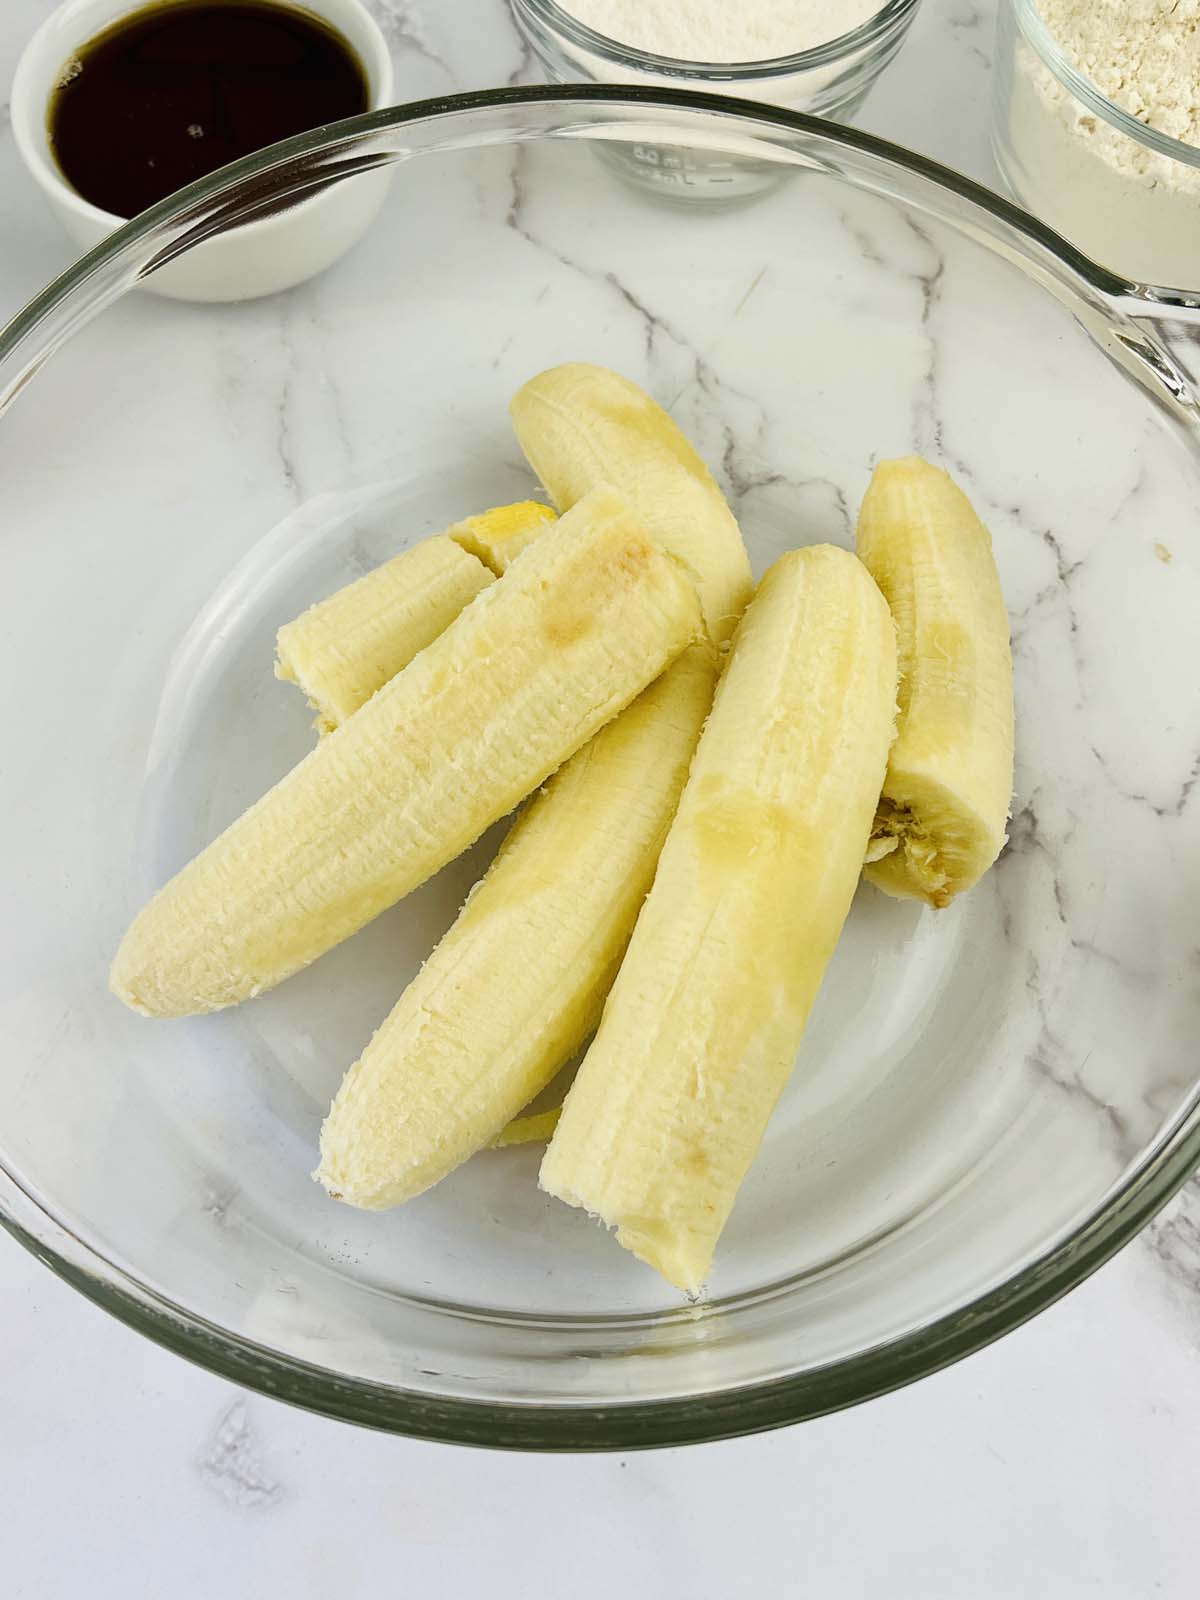 Bananas in a glass bowl.